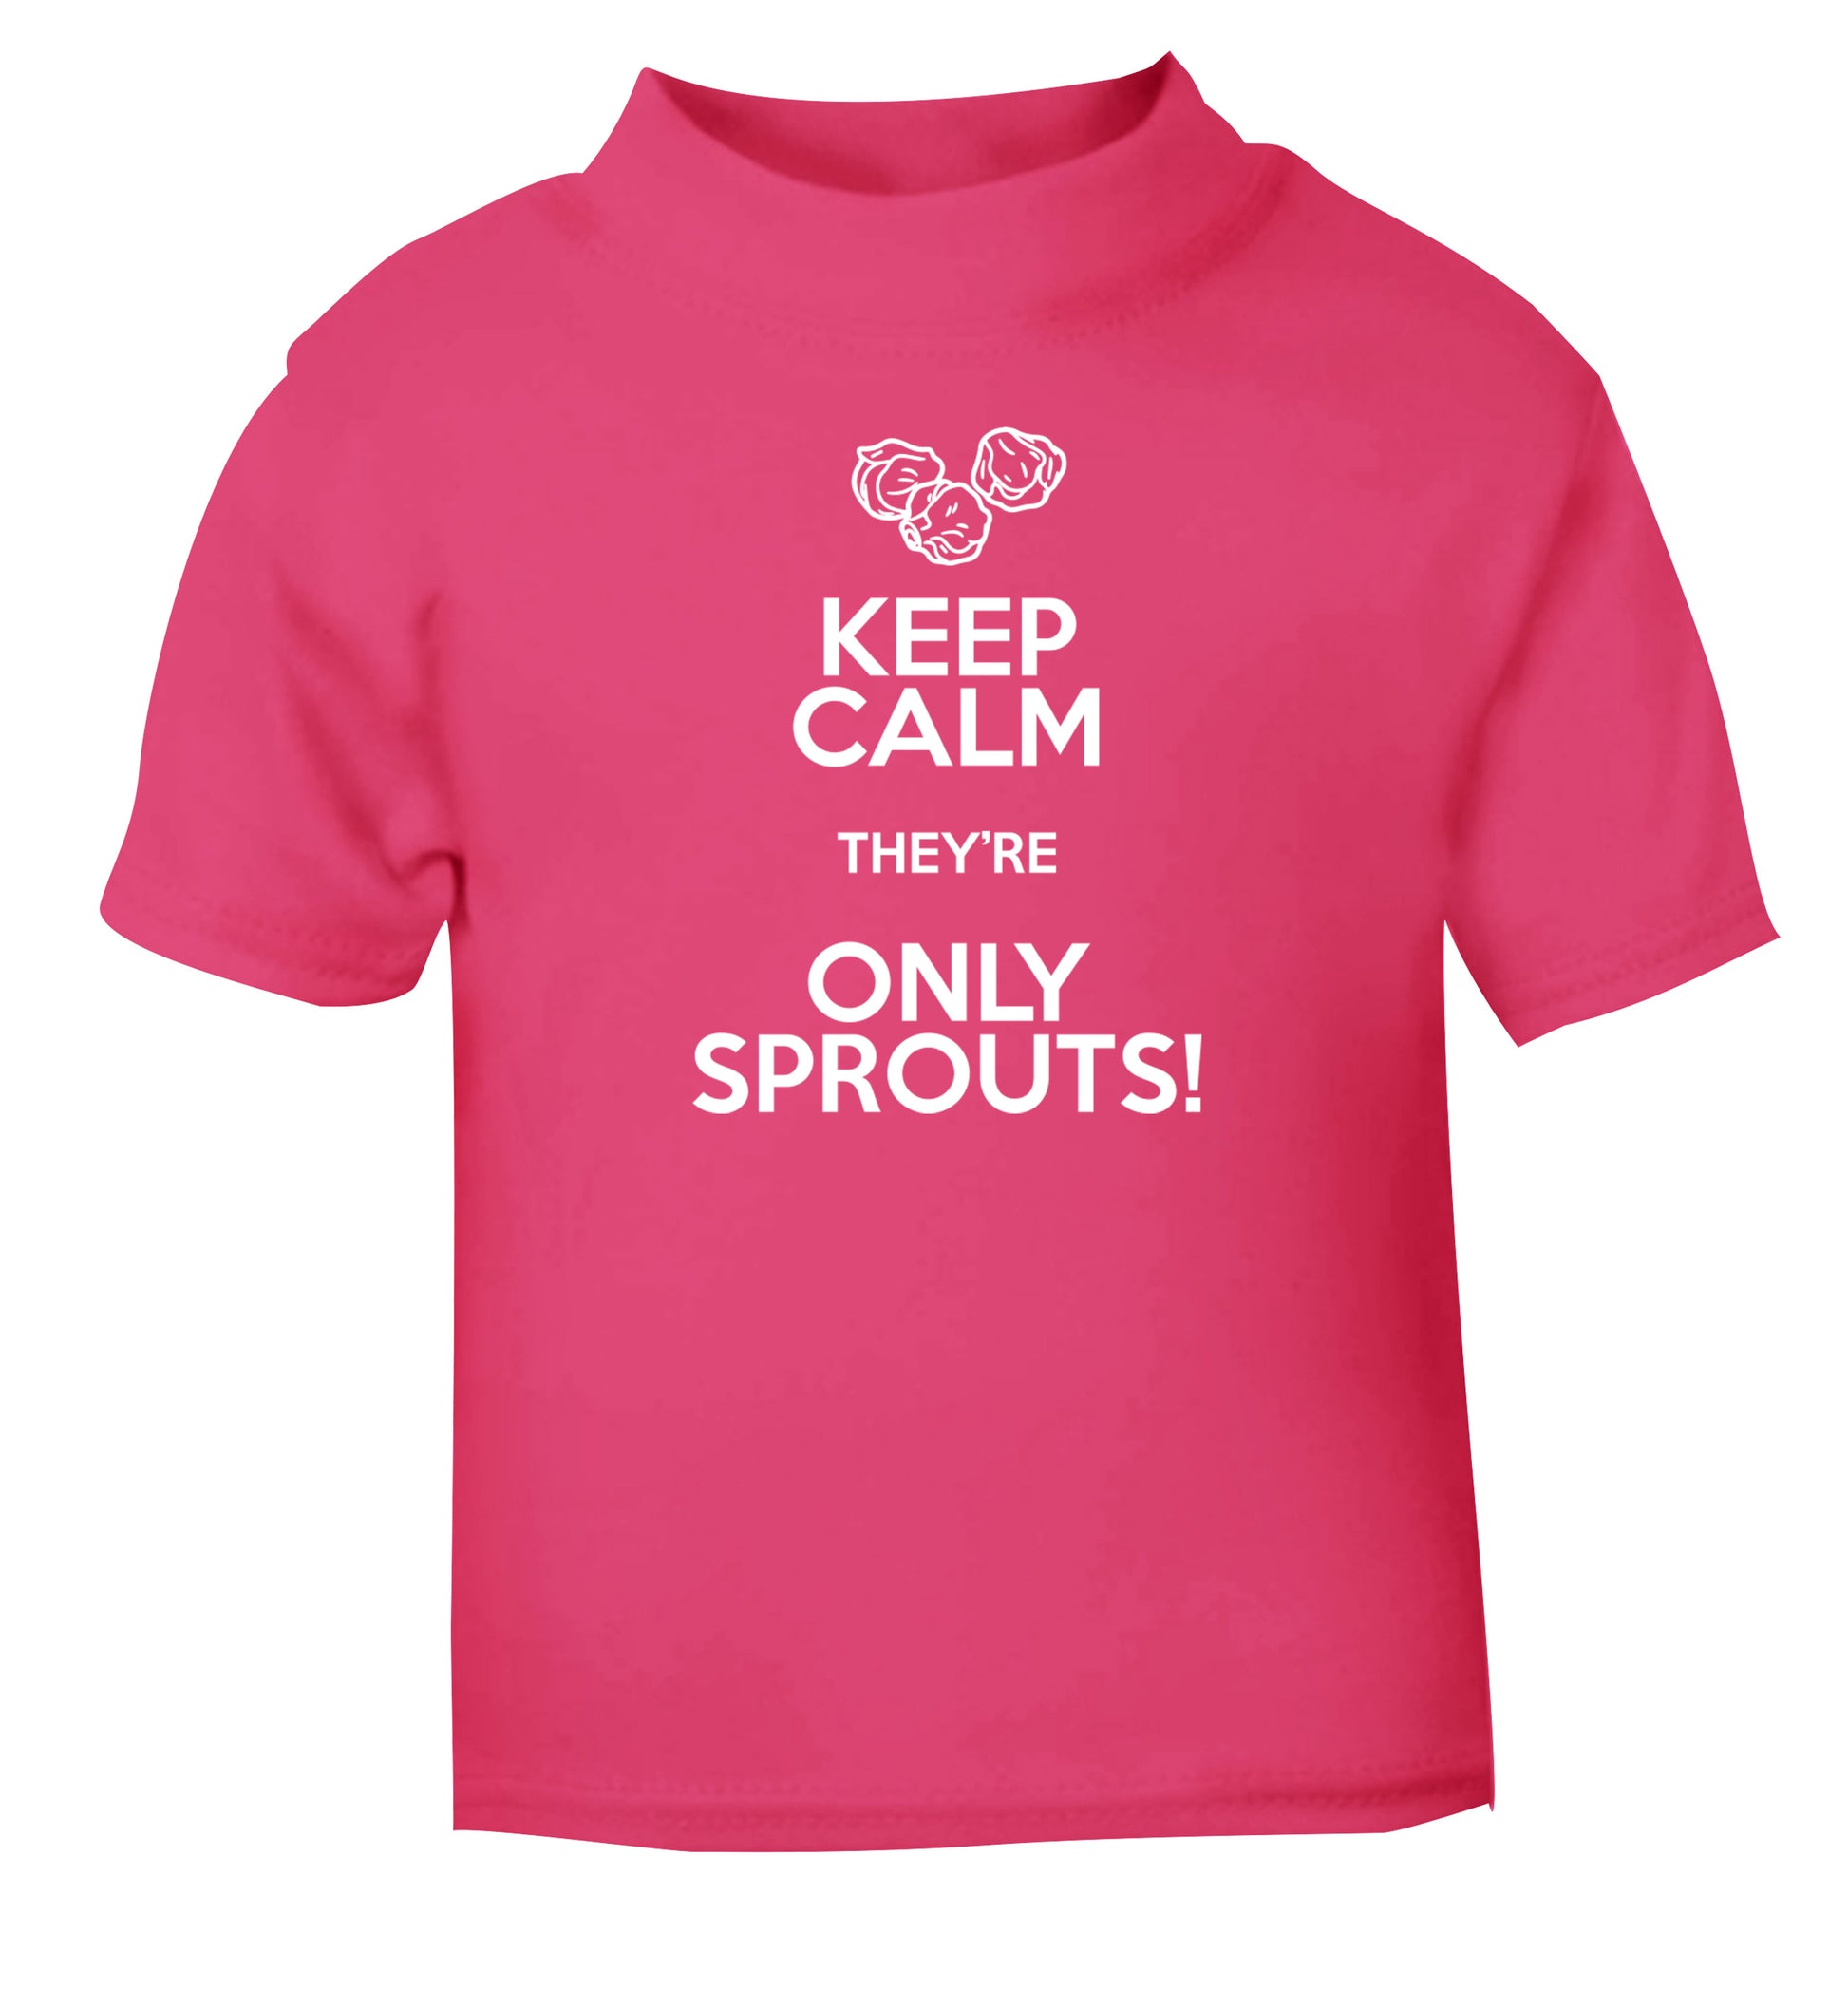 Keep calm they're only sprouts pink Baby Toddler Tshirt 2 Years